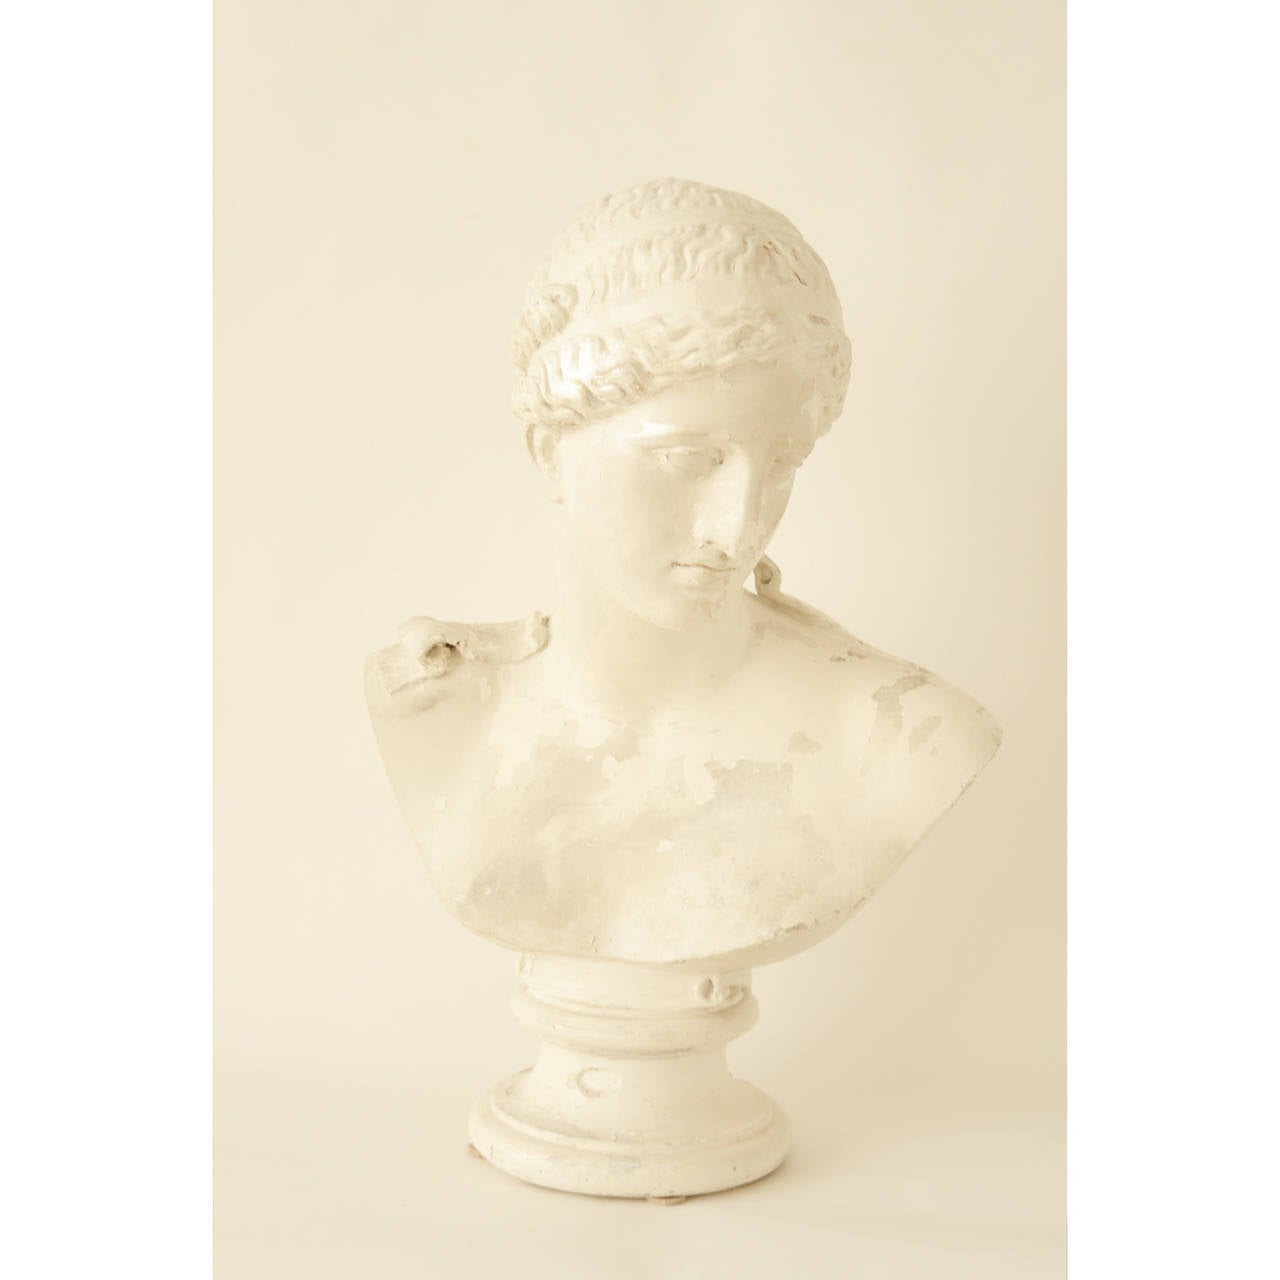 Early 20th Century Cast Plaster Bust of a Greco-Roman Style Woman, Based on an Earlier Statue. Distressed aesthetic.